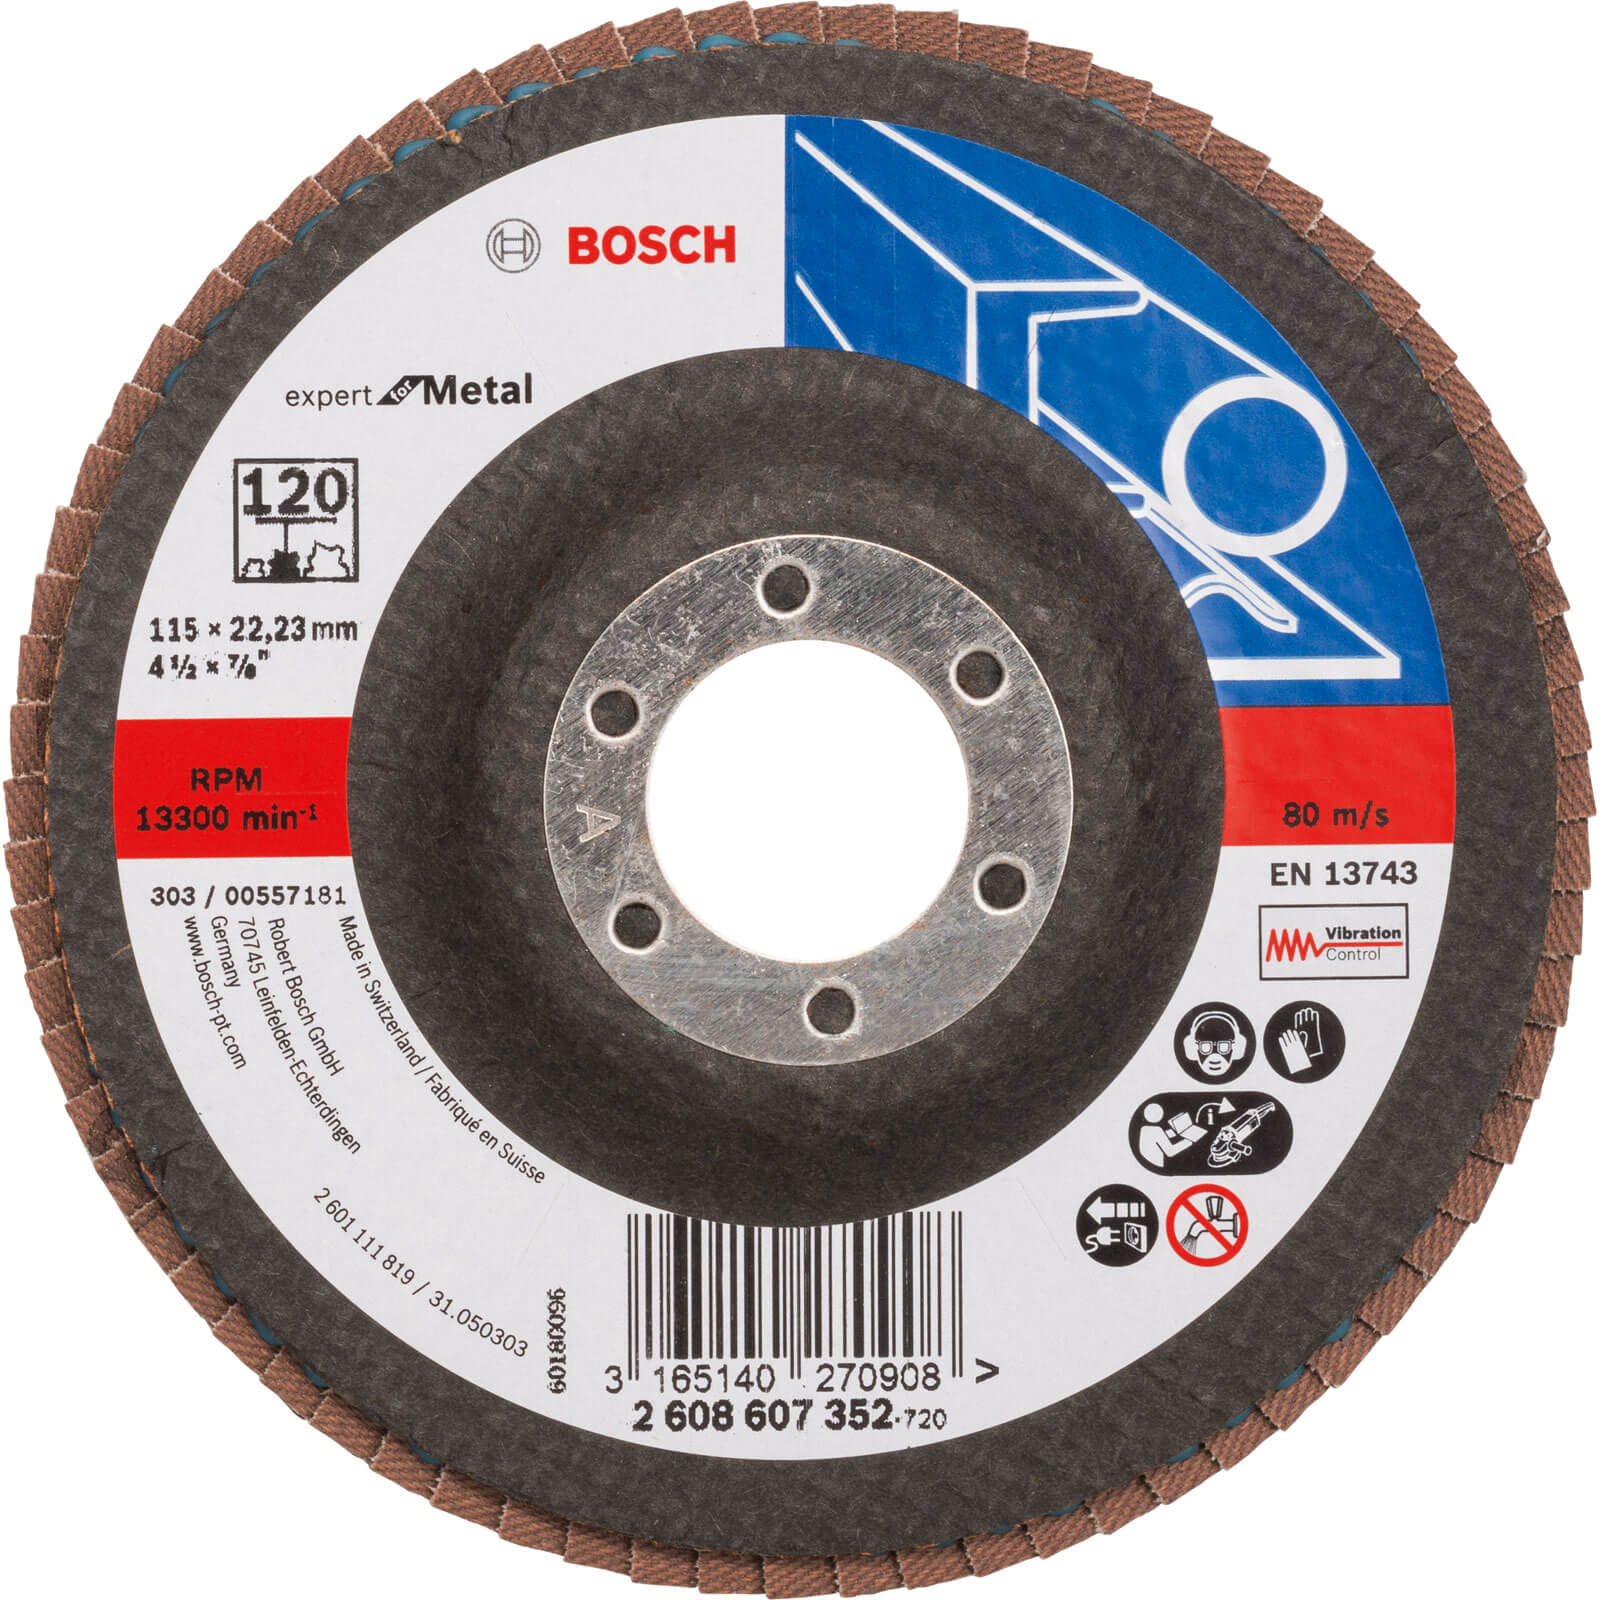 Image of Bosch Expert X551 for Metal Flap Disc 115mm 120g Pack of 1